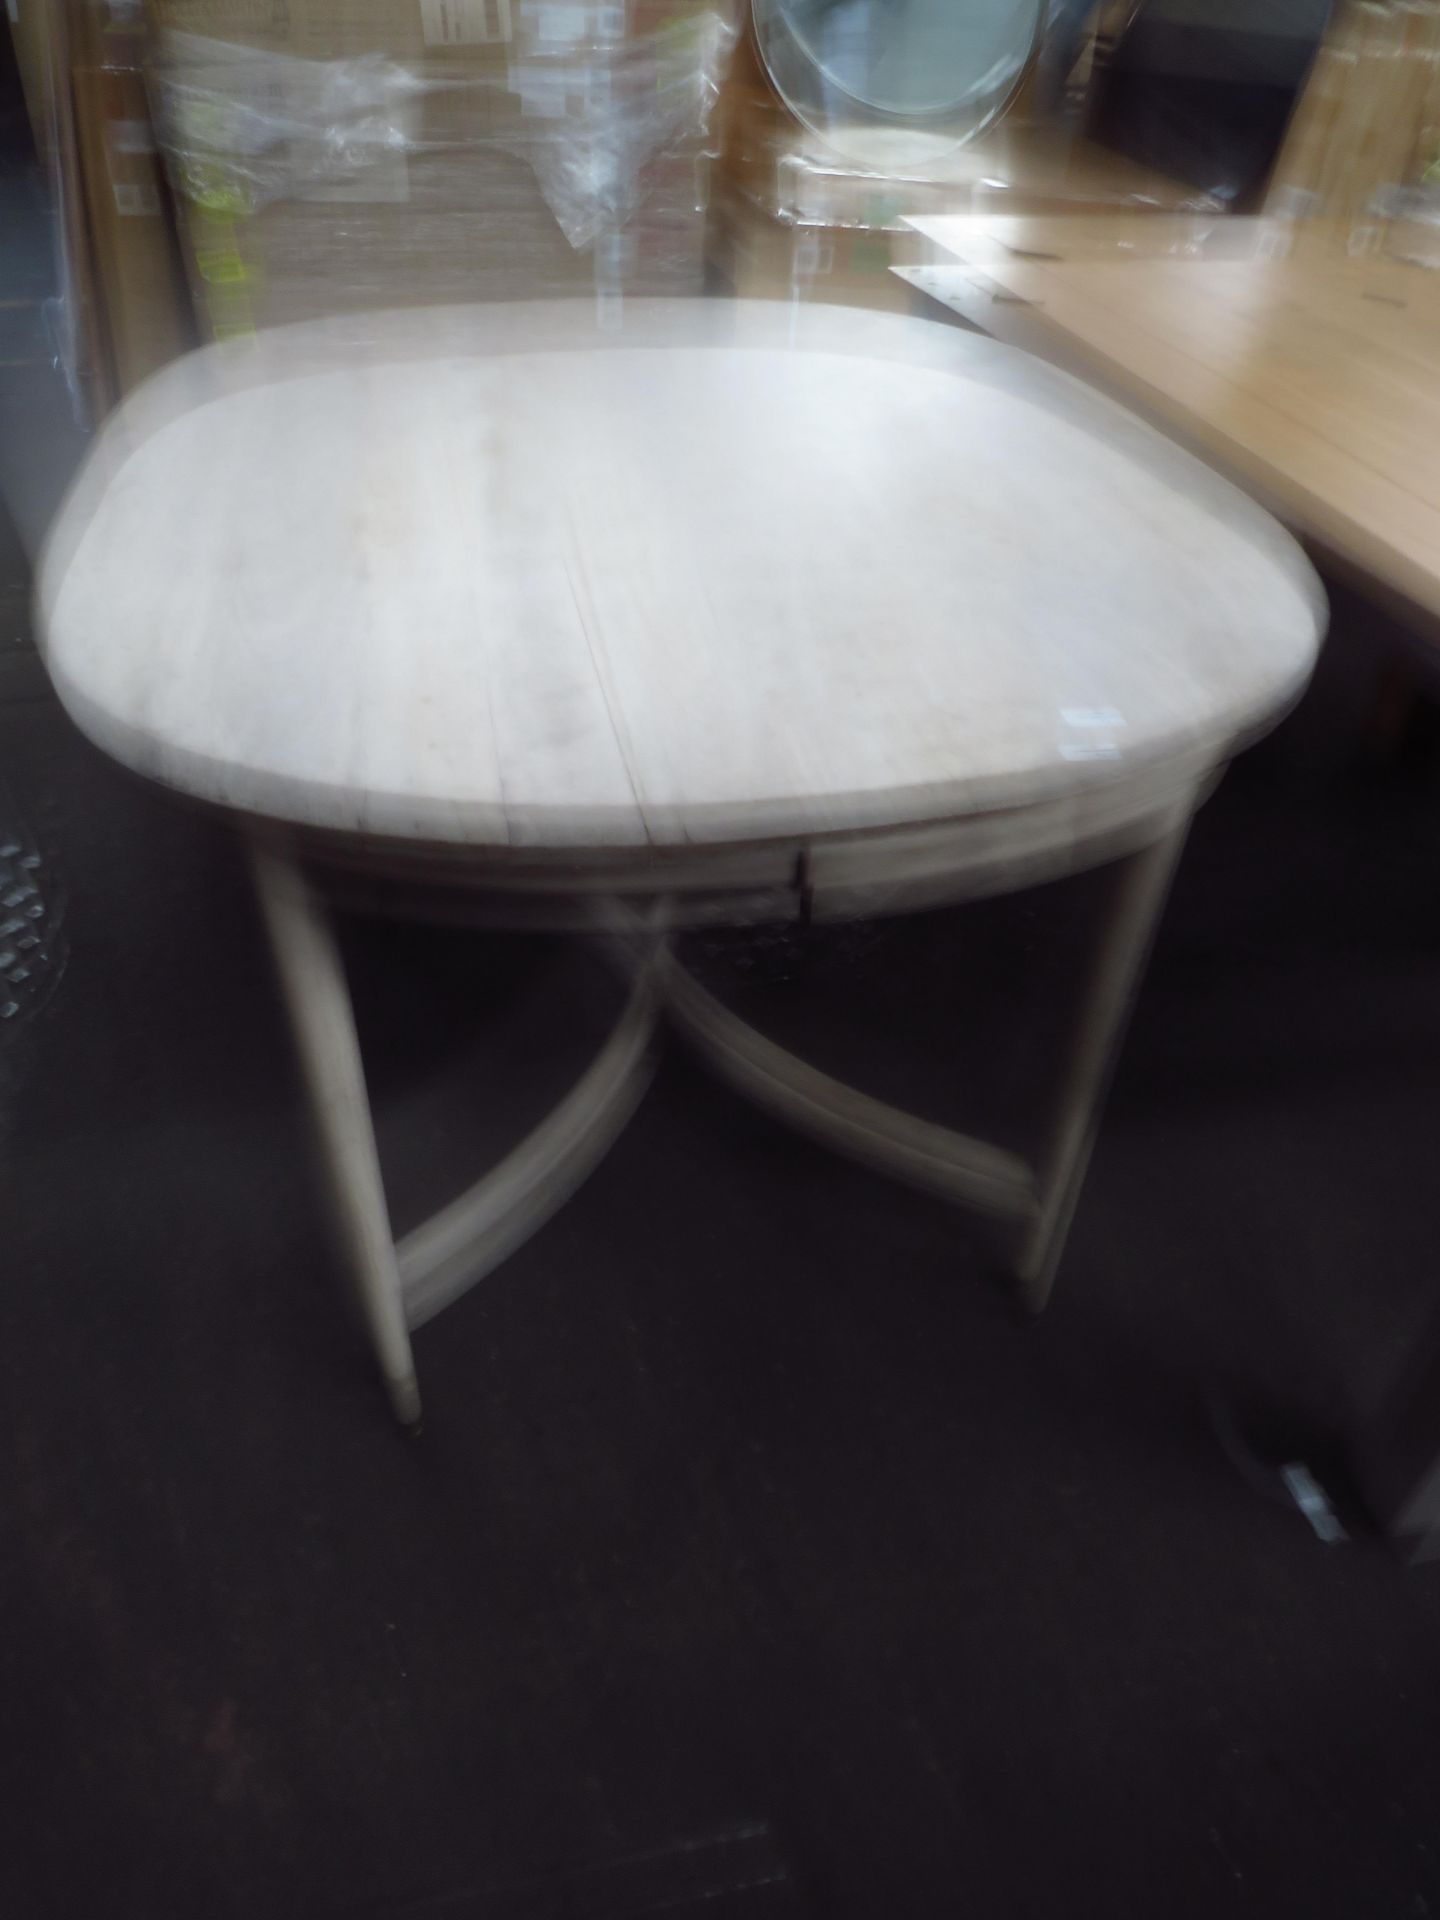 Oak Furnitureland Dinning Table, Good Condition But Might Contain The Odd Scuffs & Scratches,